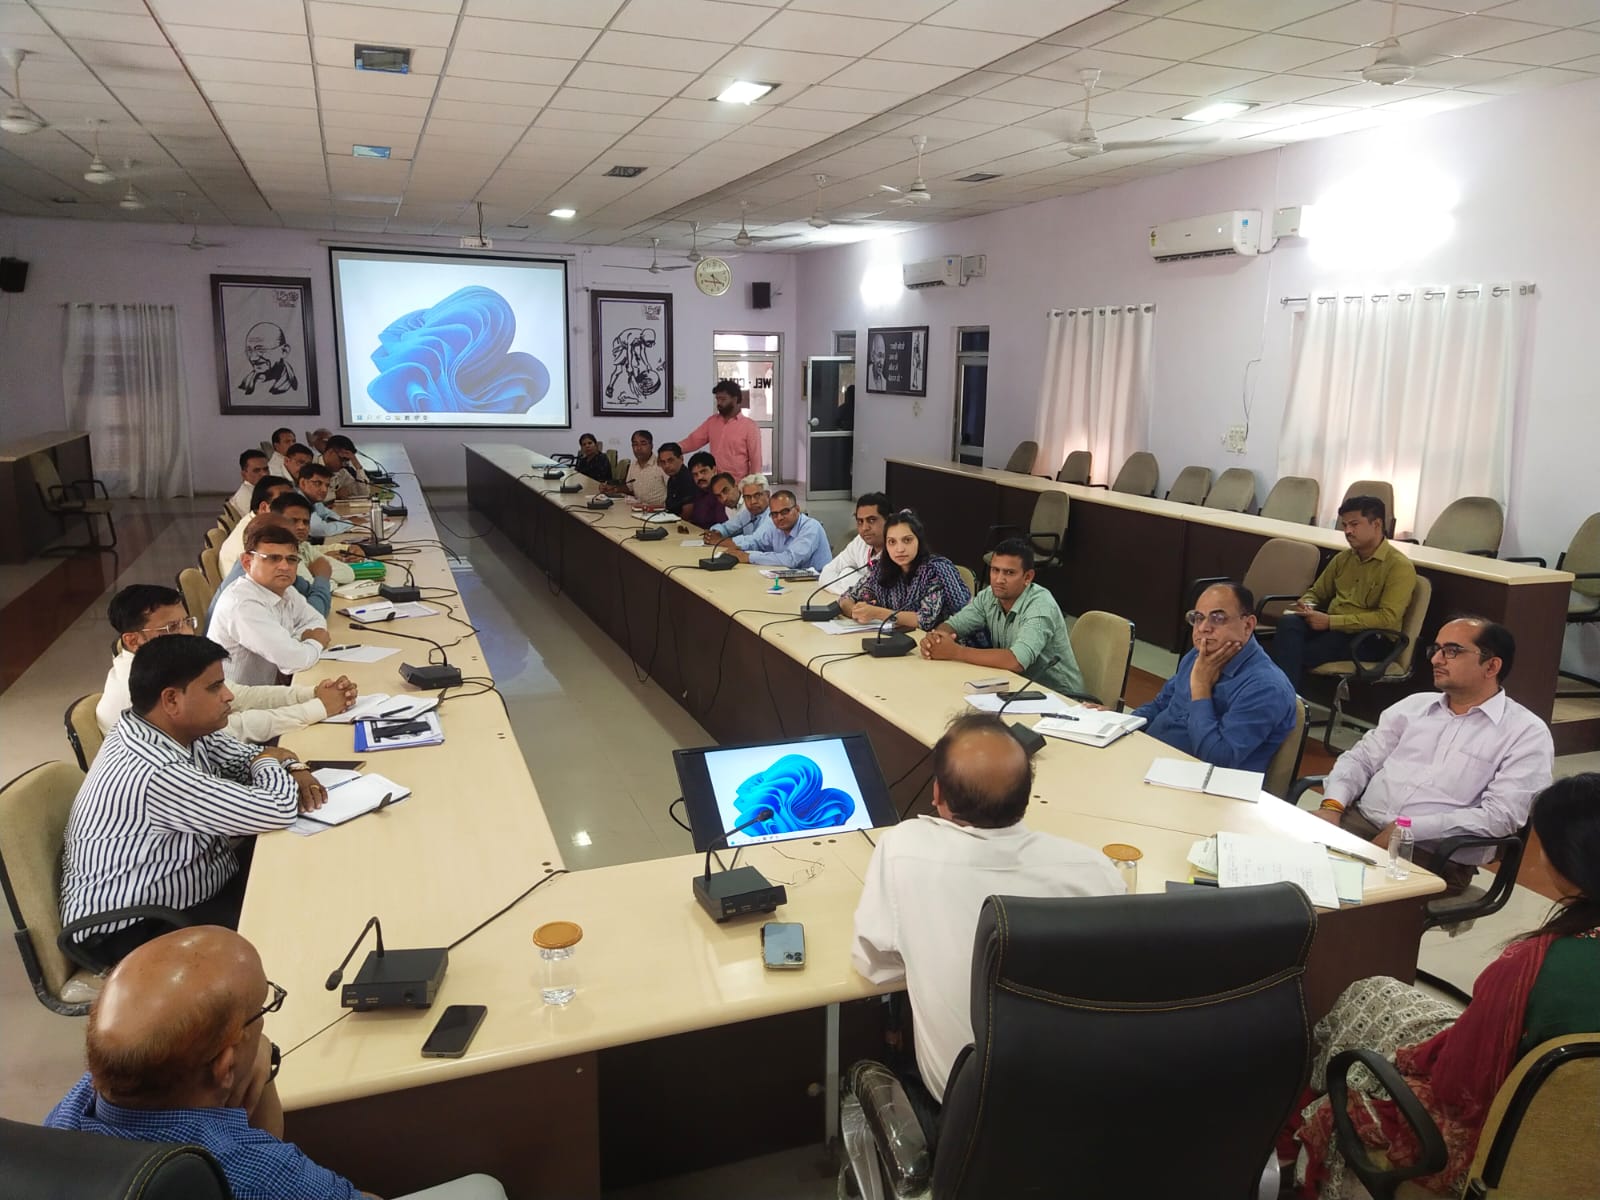 A review meeting was held regarding the entrance survey